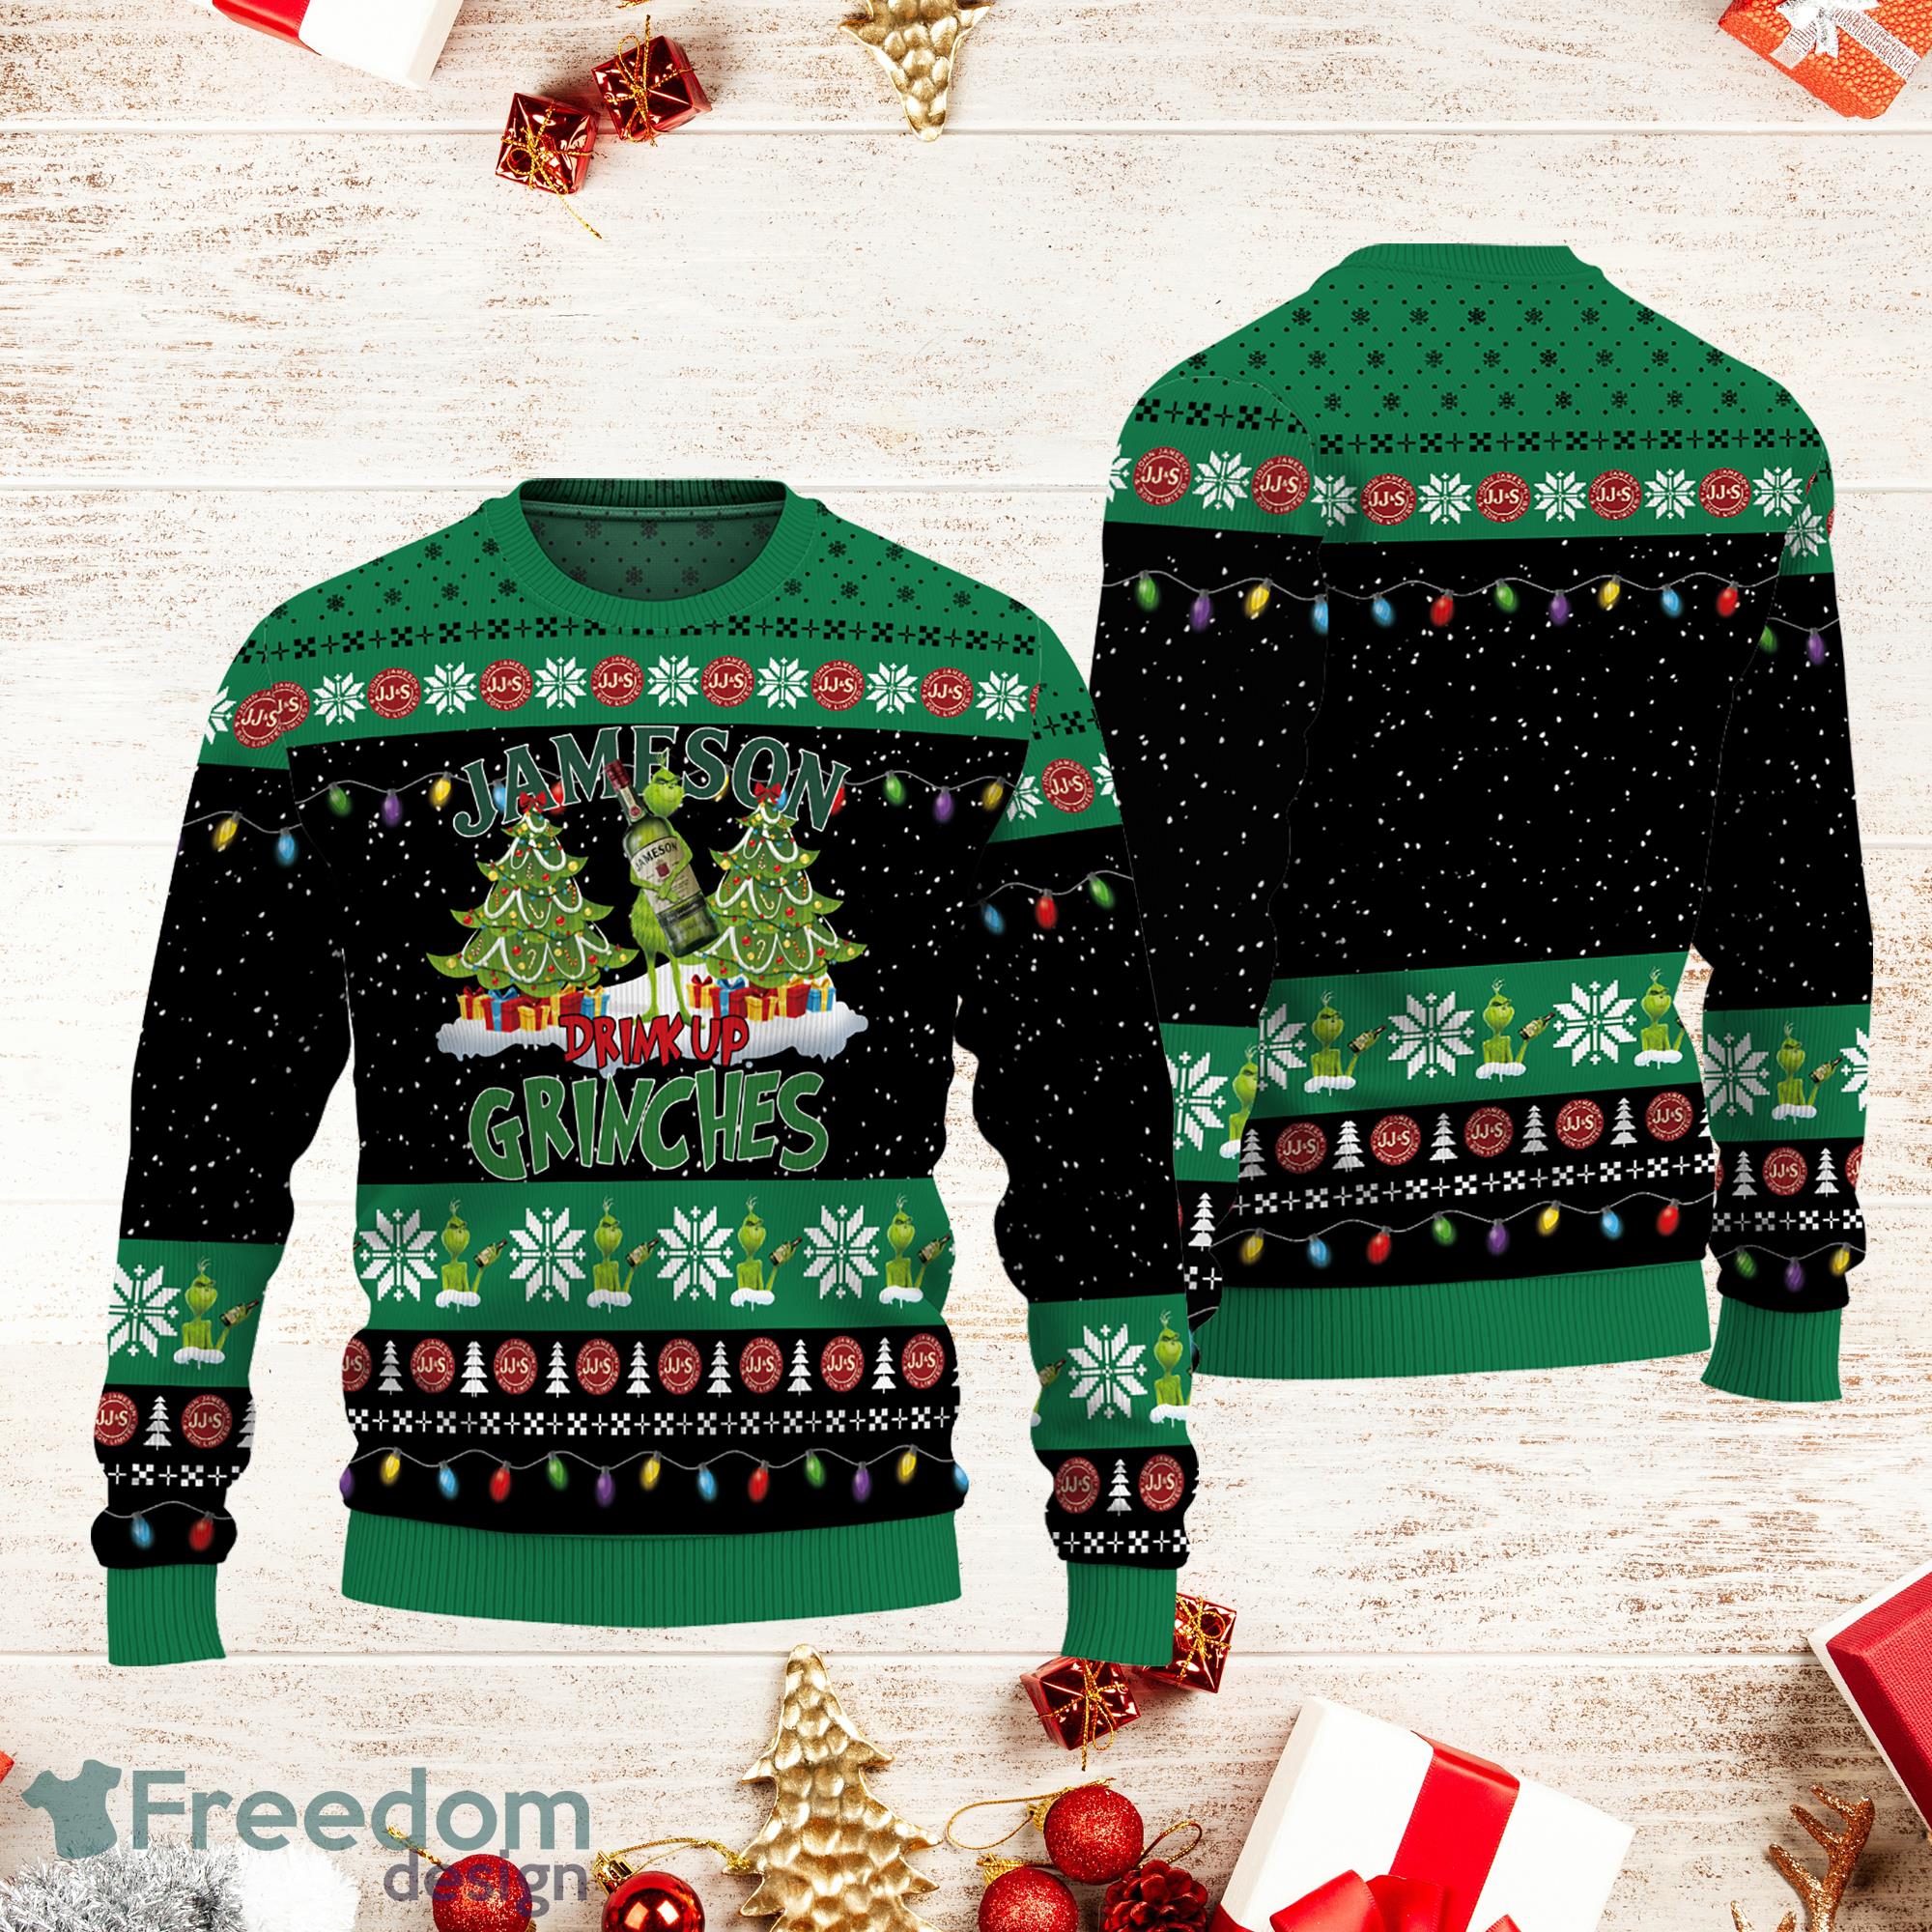 Jameson Drink Up Grinches Full Print Ugly Christmas Sweater Product Photo 1